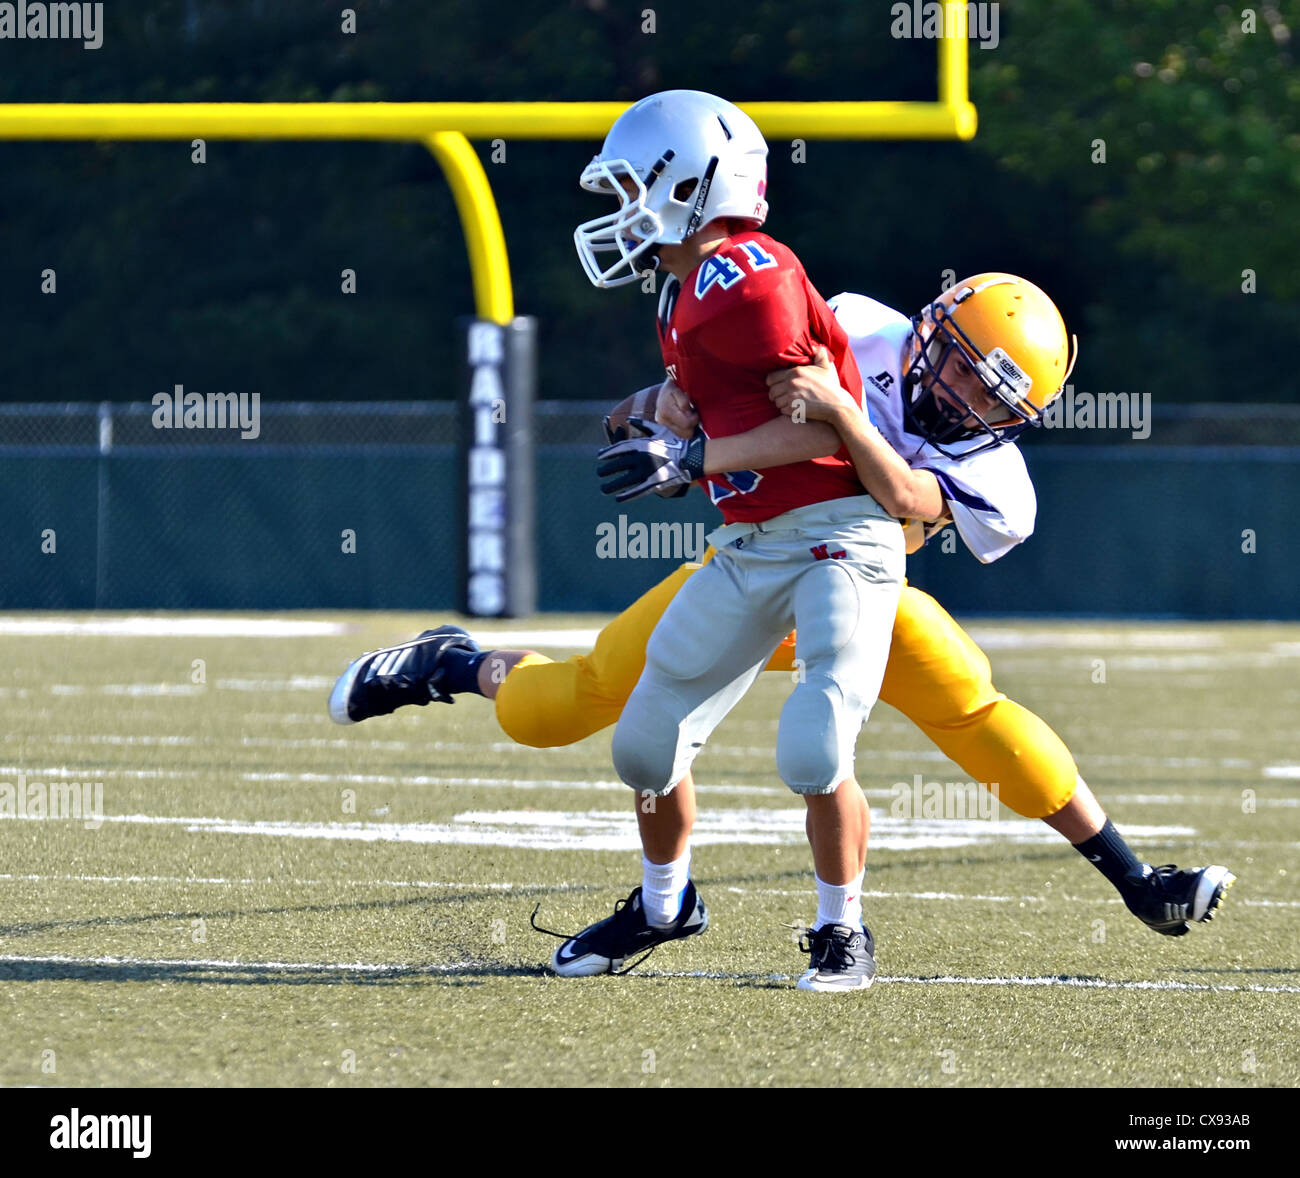 A receiver at the goal line being tackled during a football game of 7th grade boys. Stock Photo